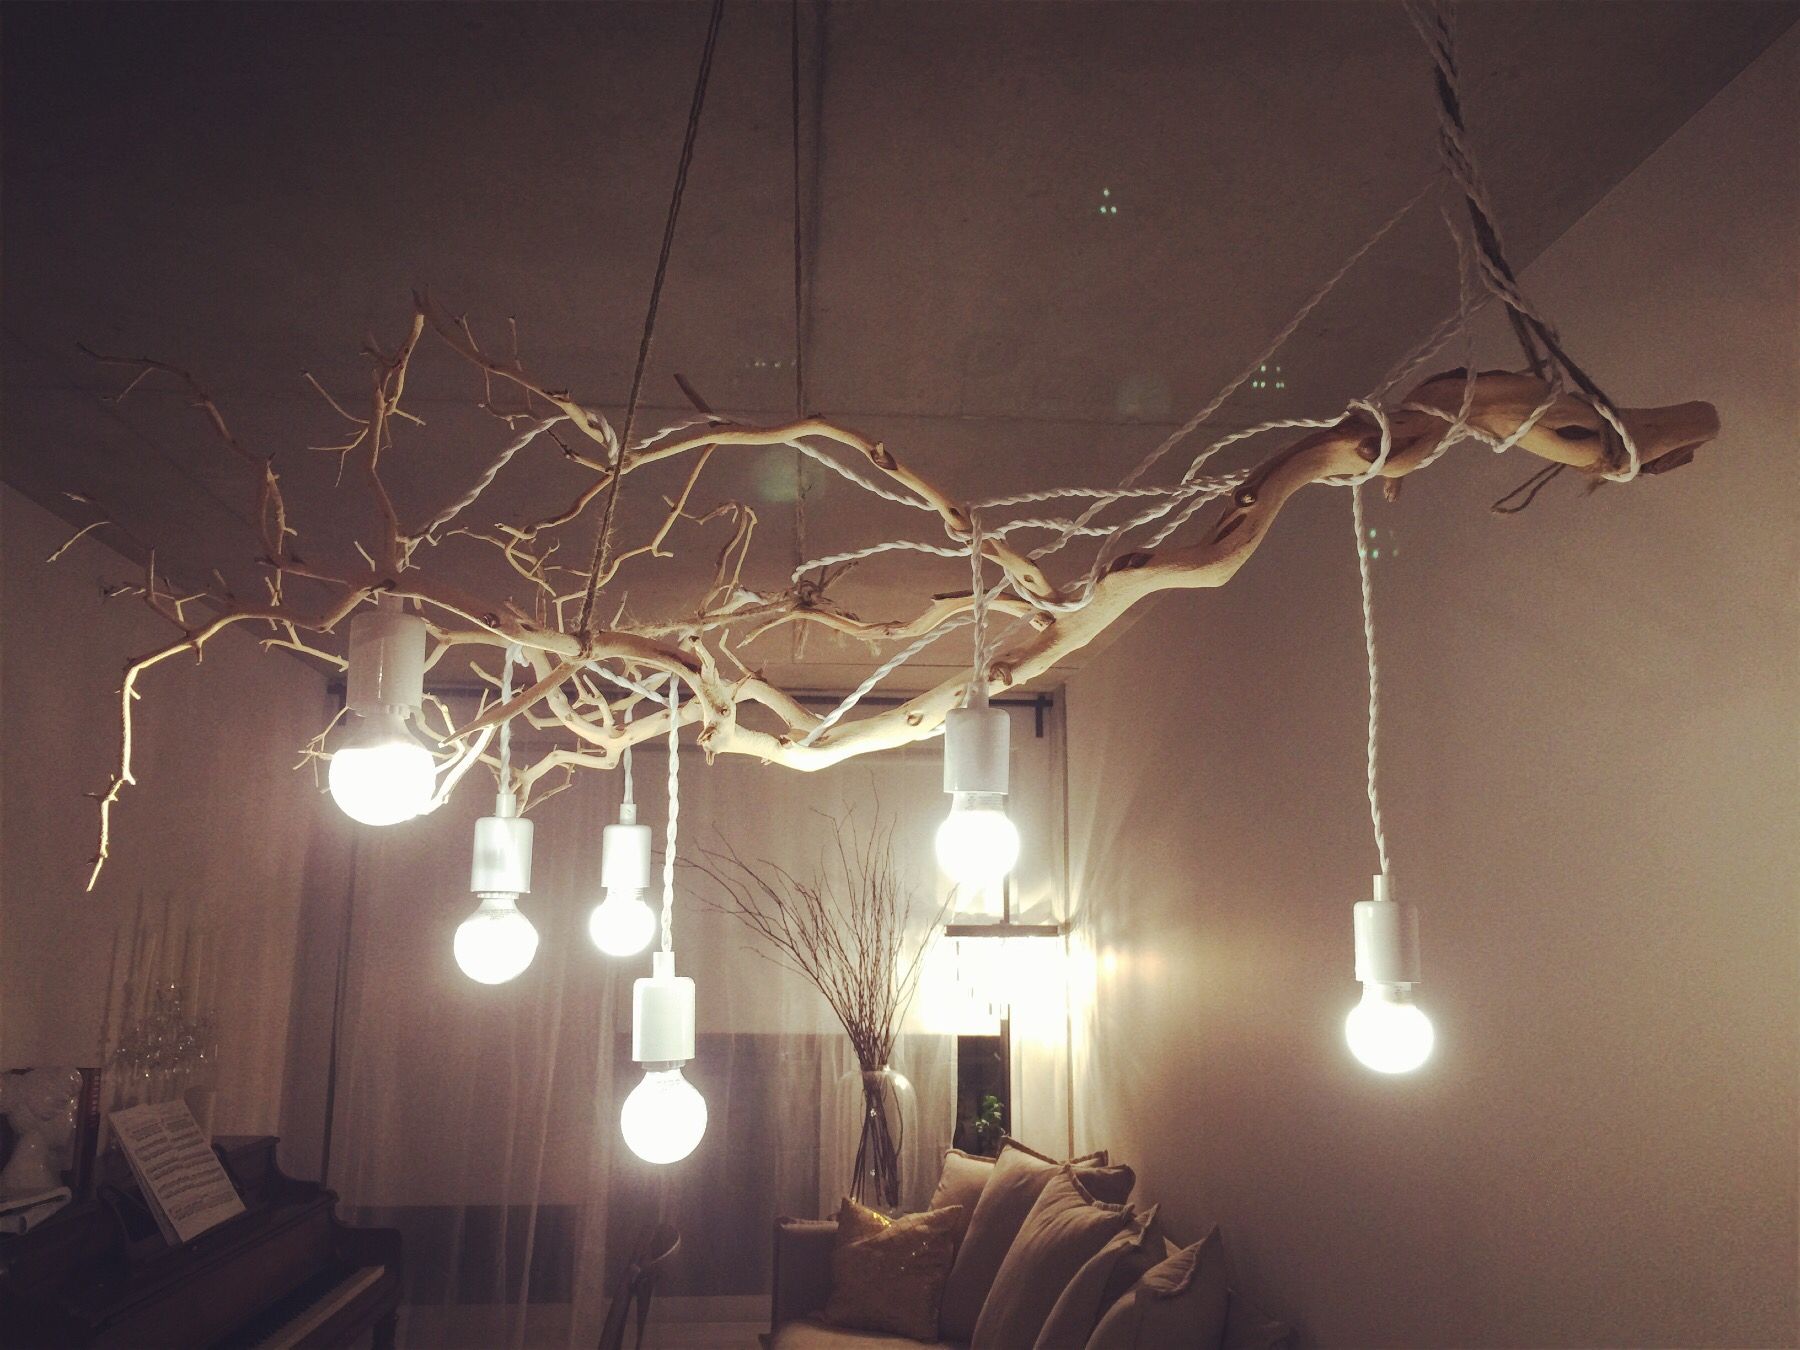 My Favourite Diy Branch Chandelier Made Just Branches And Throughout Branch Chandeliers (View 10 of 12)